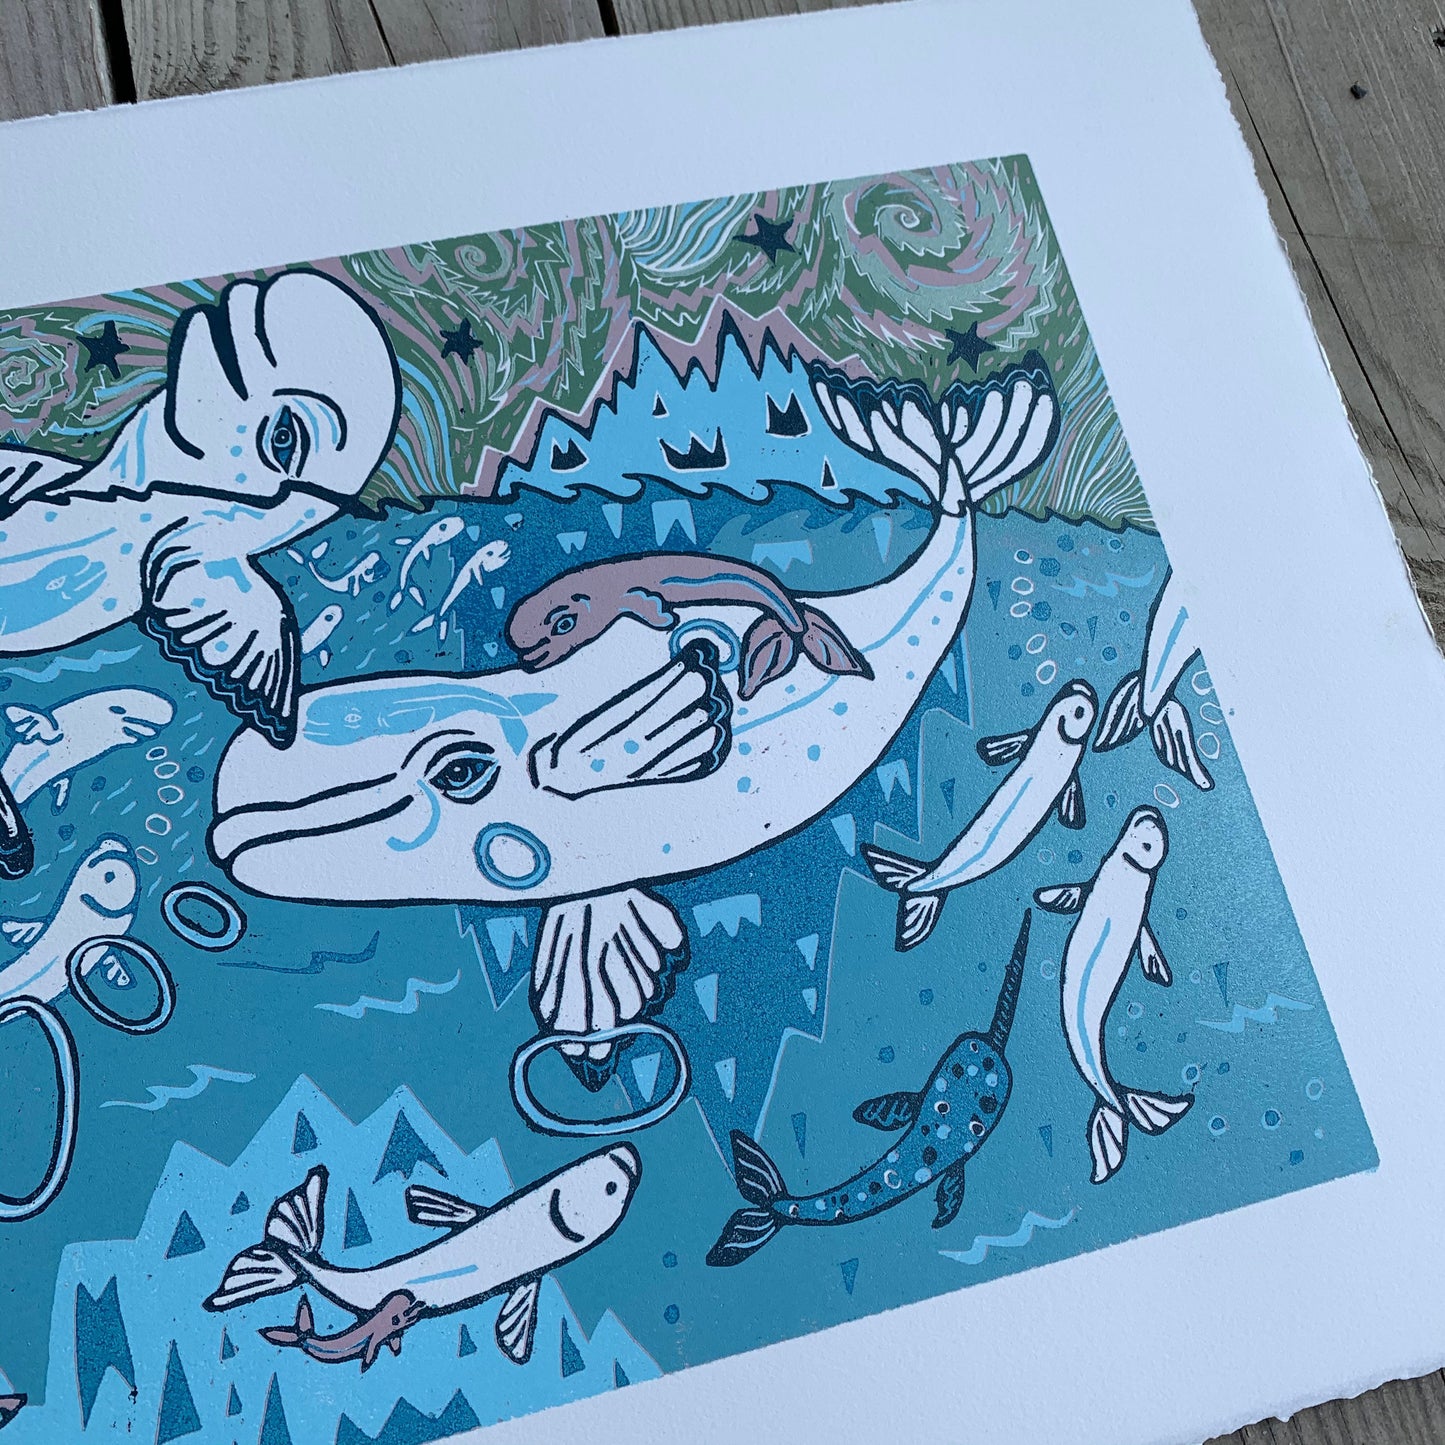 Beluga woodcut with little whales in the big whales